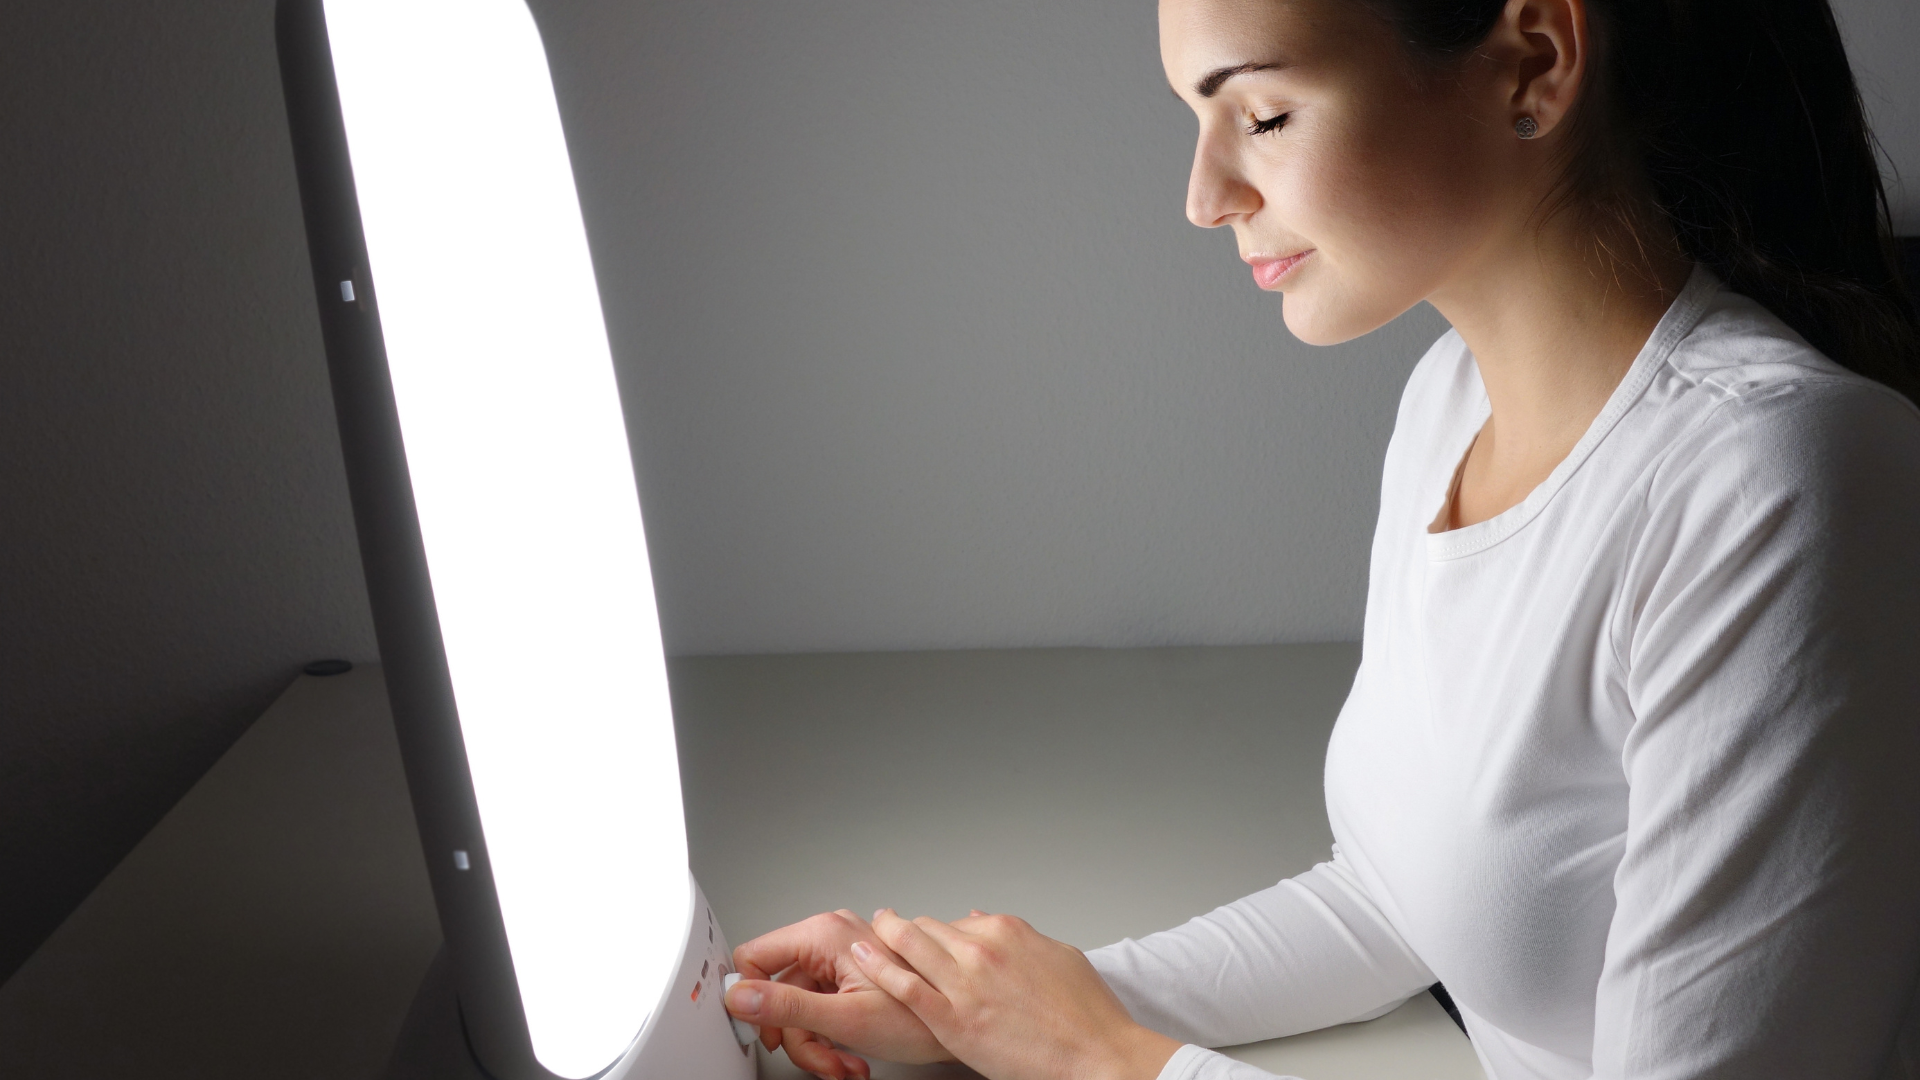 A woman wearing white sitting in front of a light box...